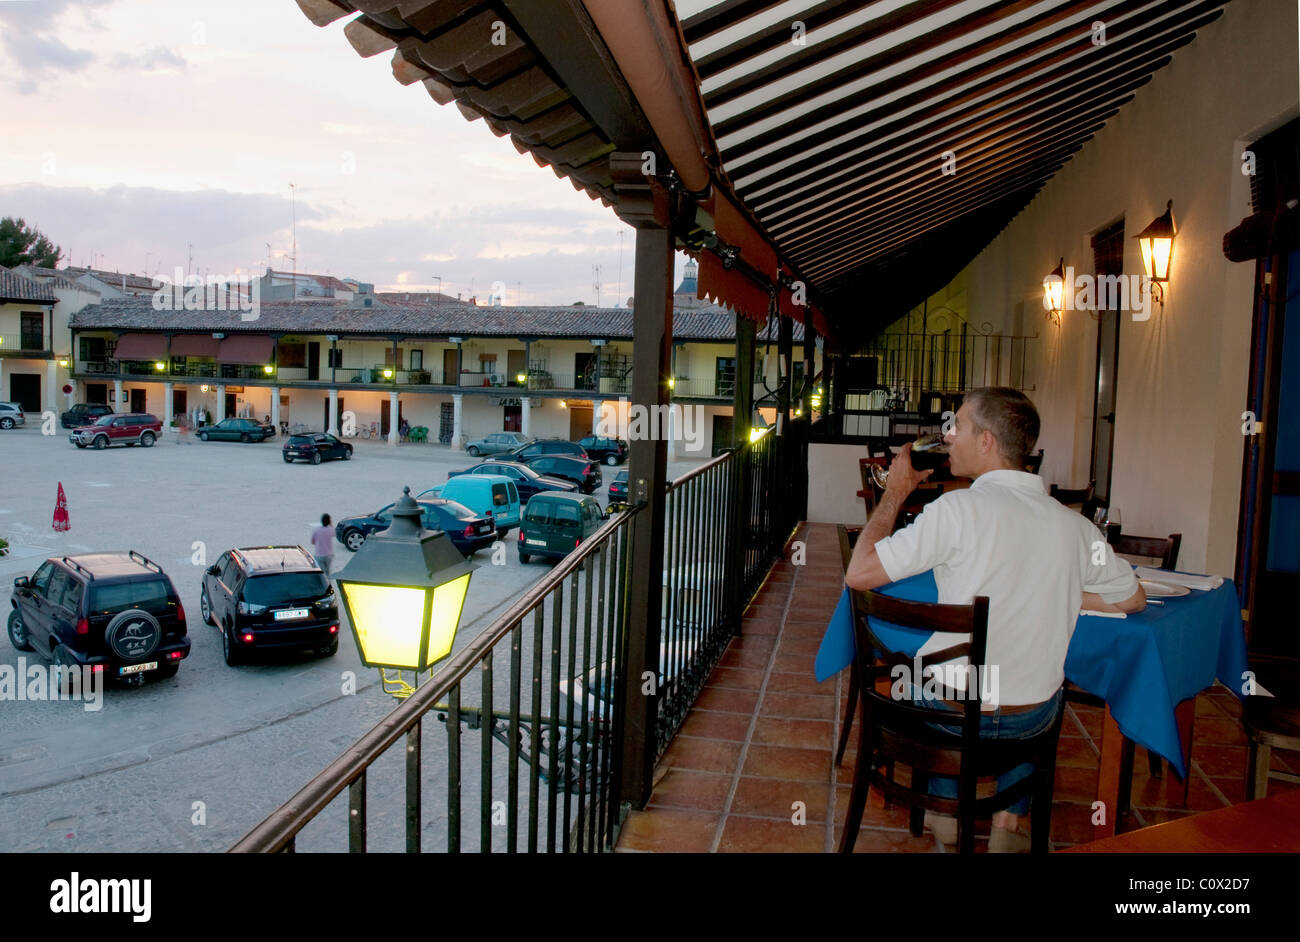 Man drinking a glass of wine and looking at the Main Square from a balcony. Colmenar de Oreja, Madrid province, Spain. Stock Photo